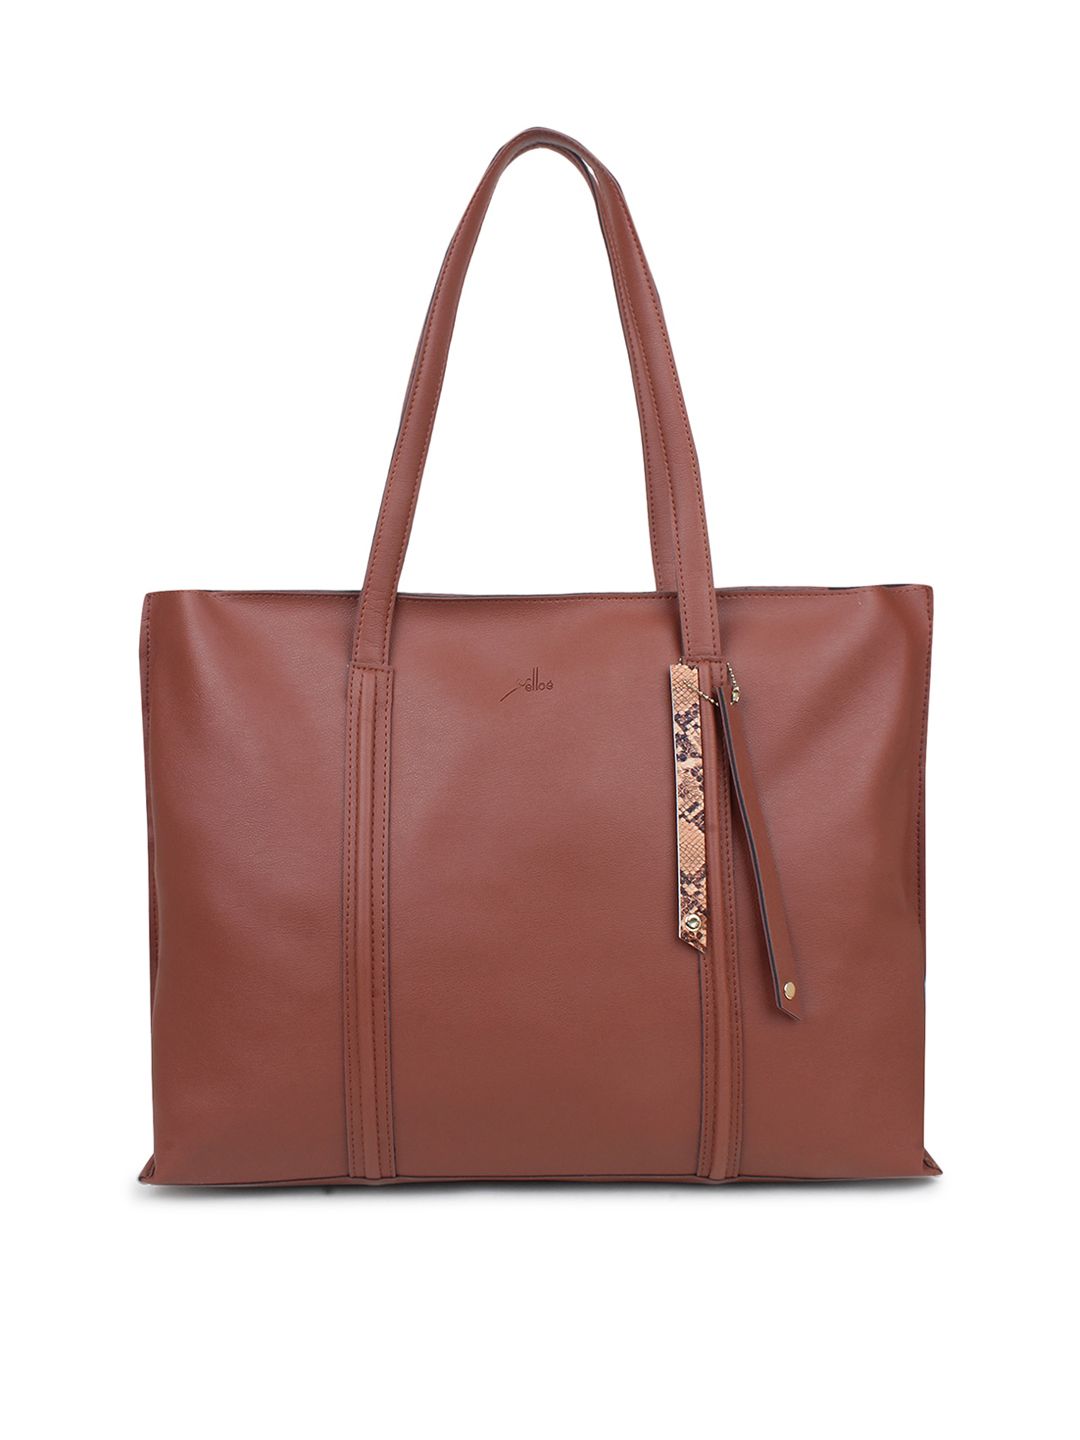 yelloe Tan Oversized Structured Tote Bag Price in India